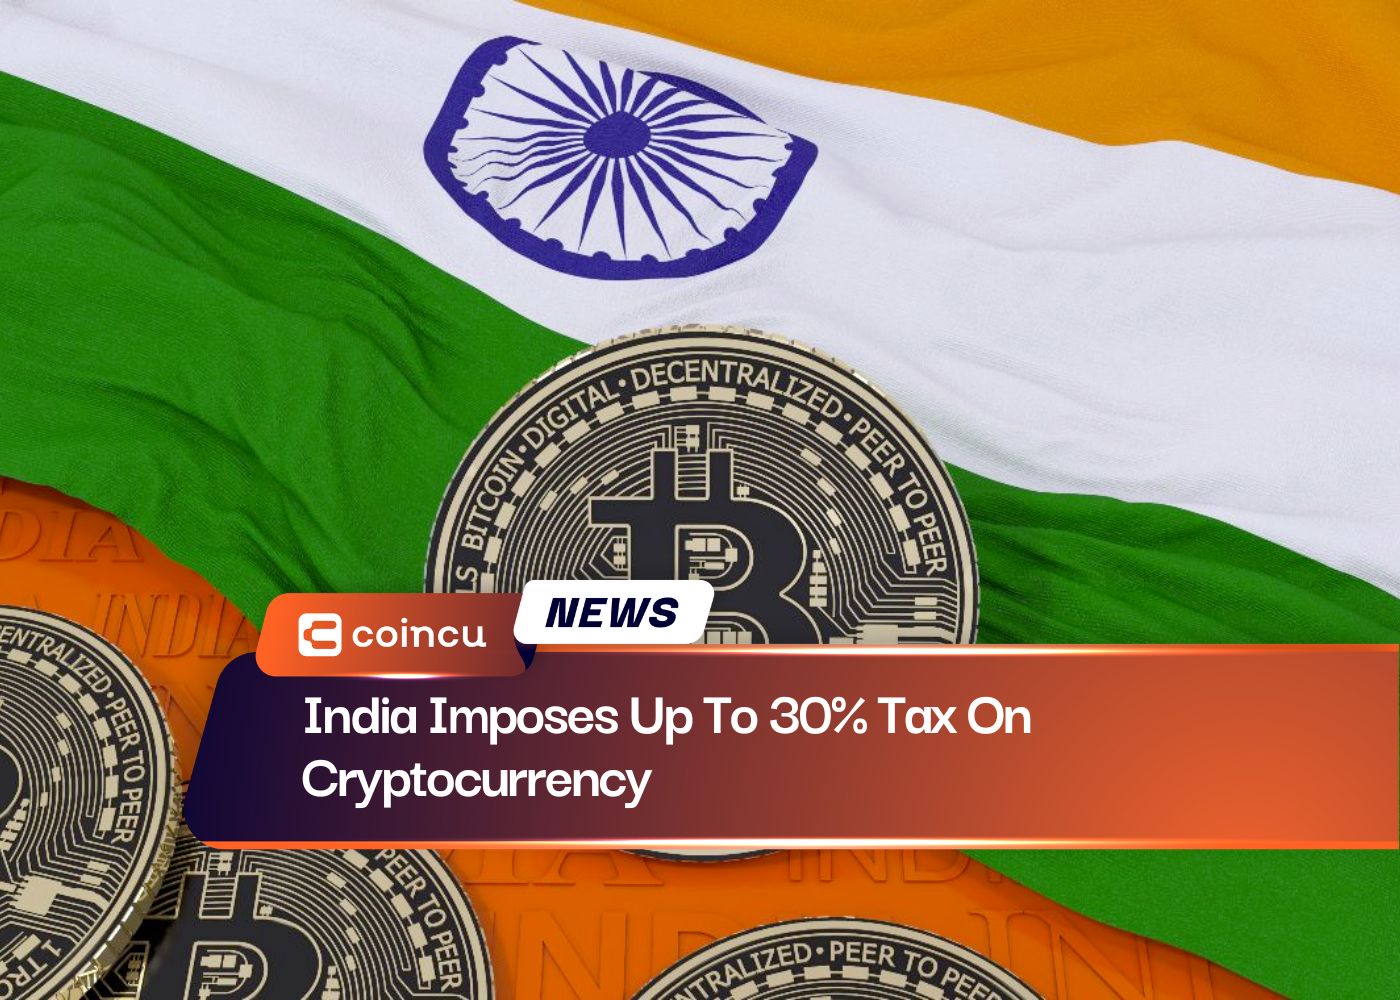 India Imposes Up To 30% Tax On Cryptocurrency